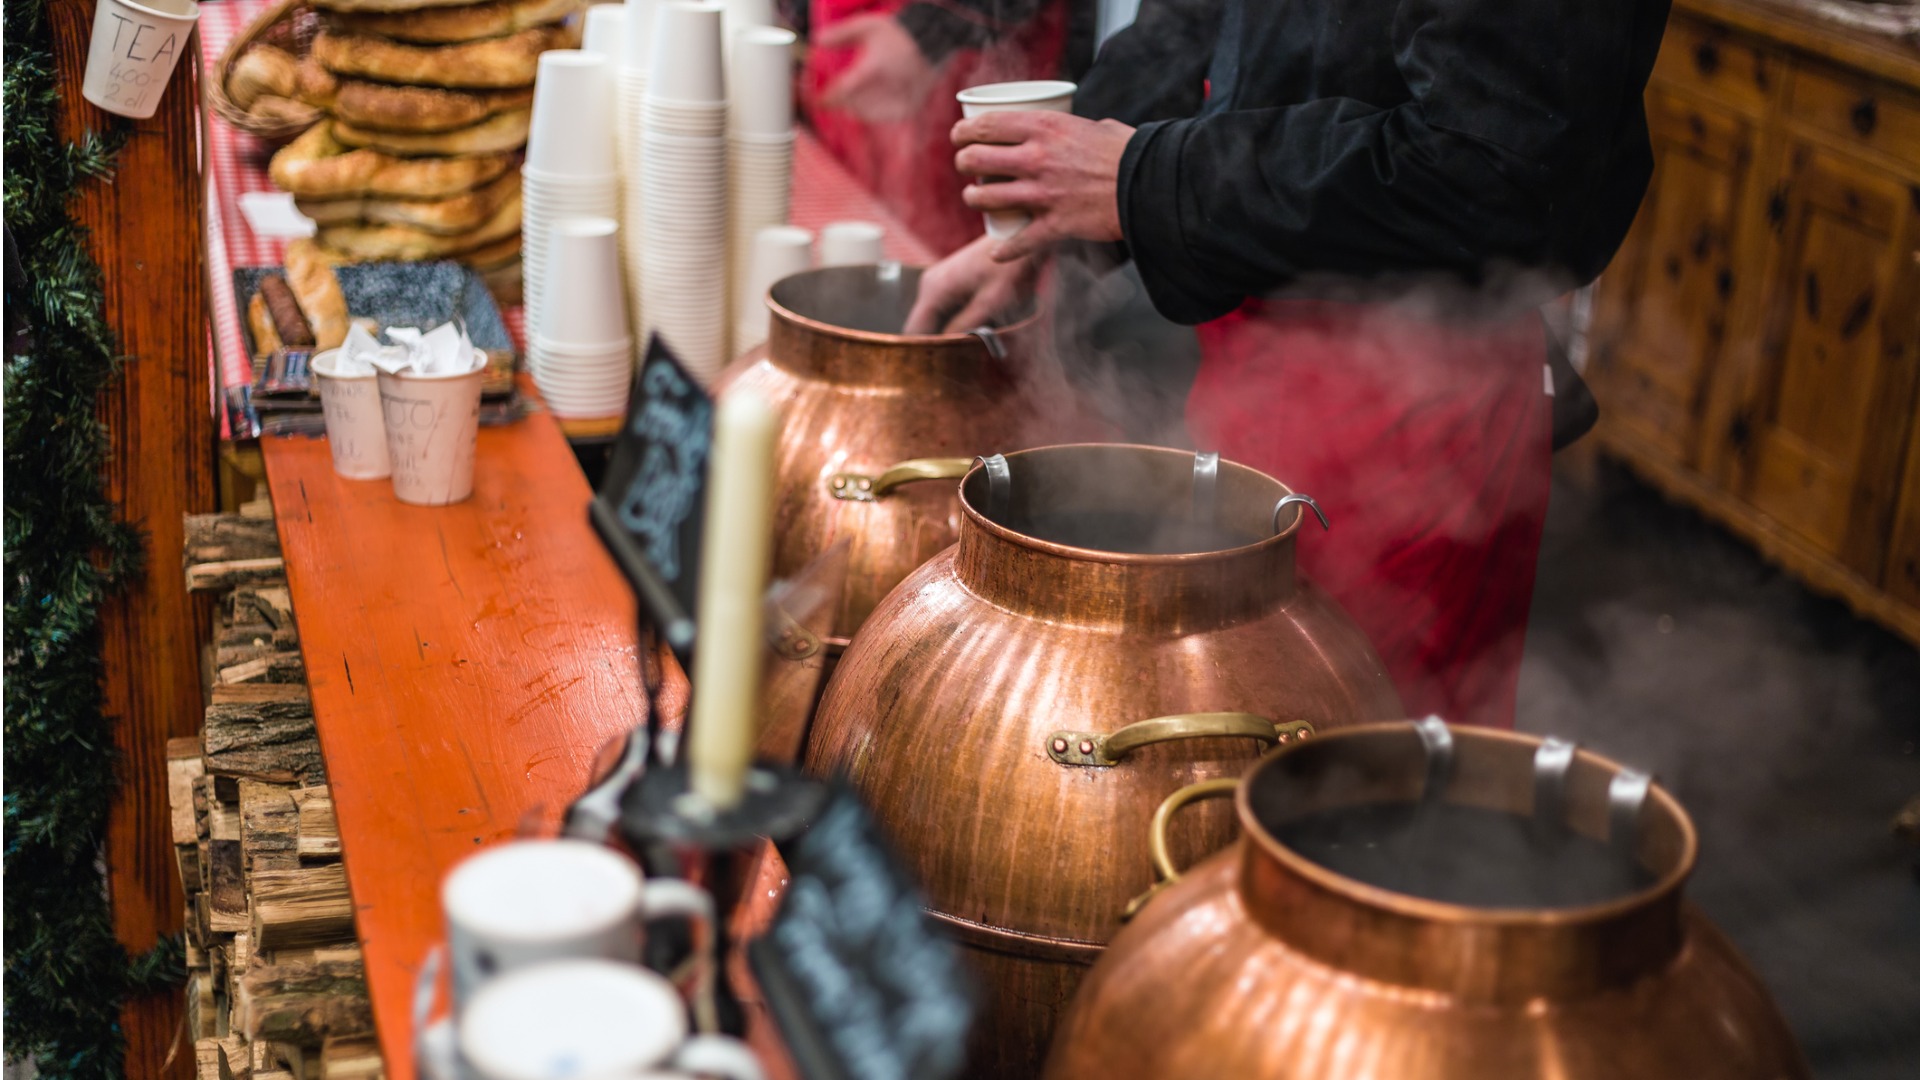 This image shows a man serving mulled wine at a Budapest Christmas market.